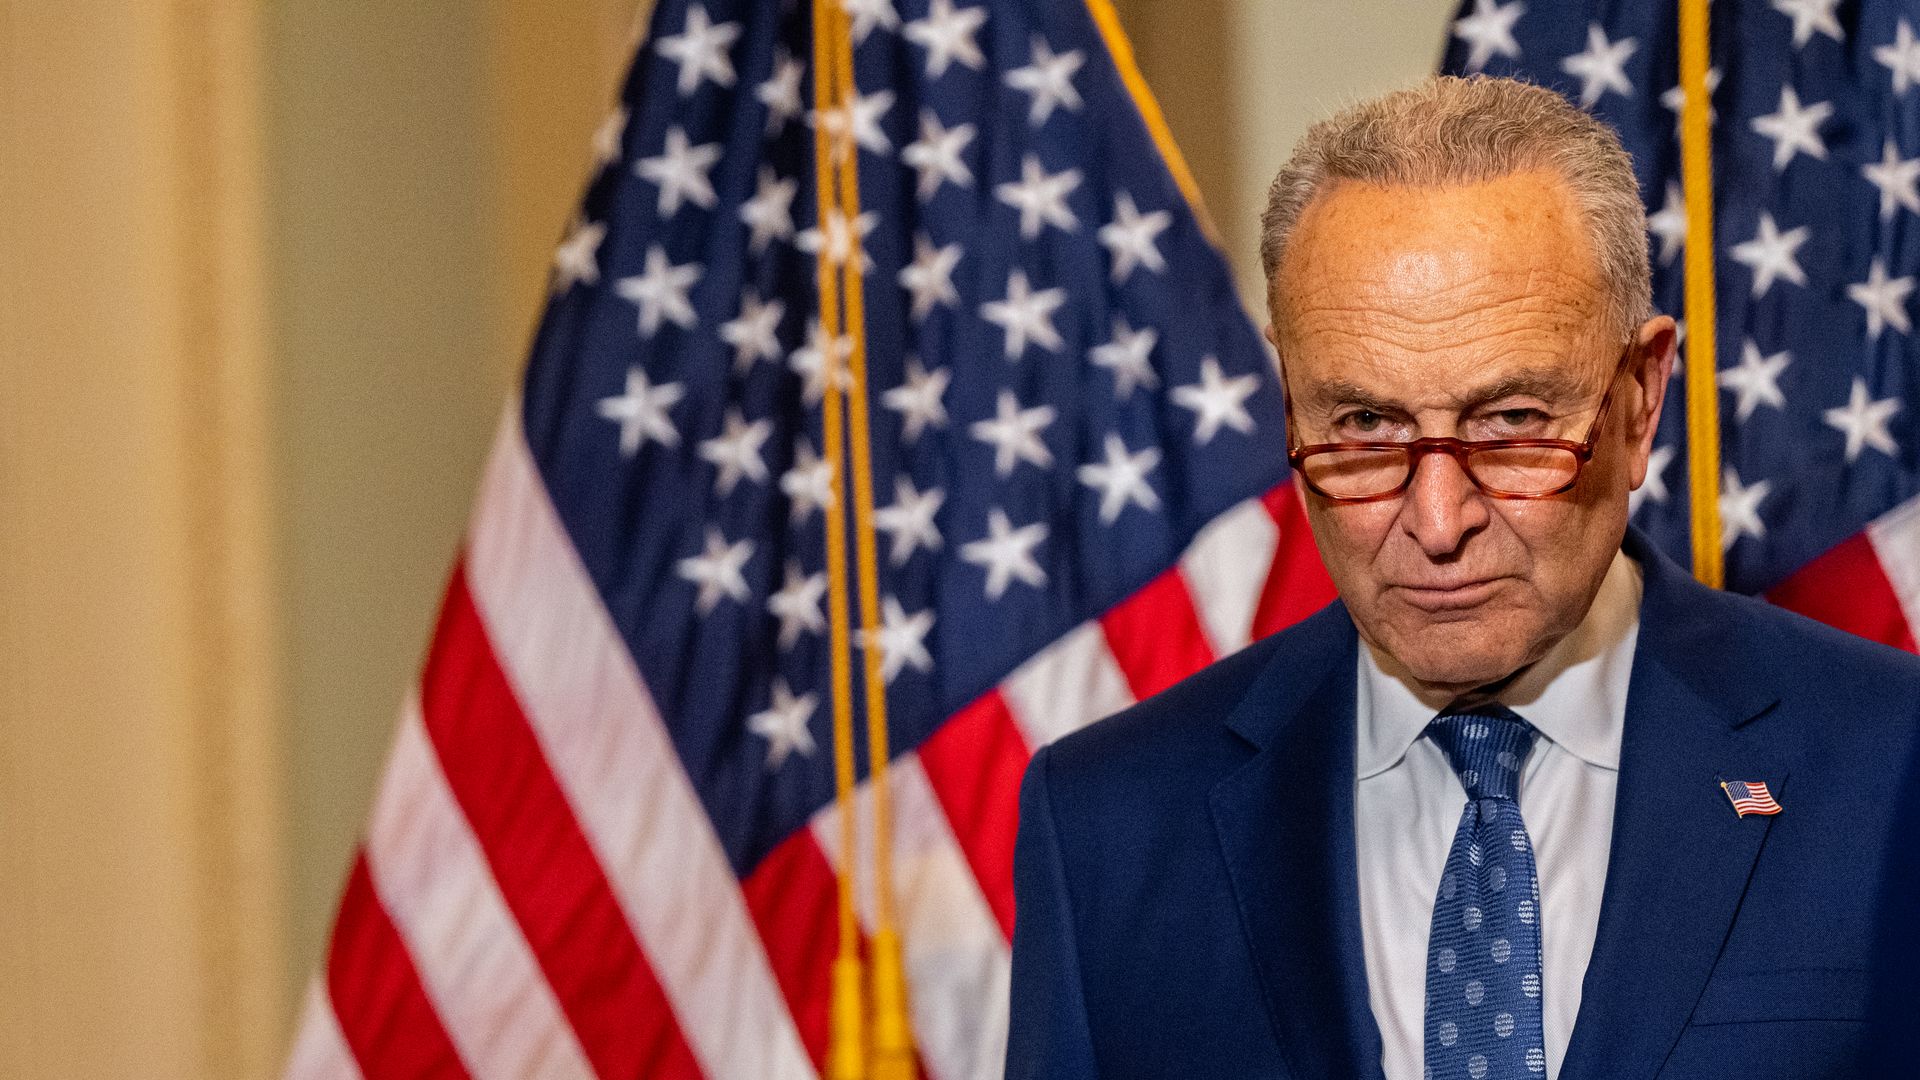 en. Majority Leader Chuck Schumer (D-NY) looks on during a news conference after the Senate luncheons in the U.S. Capitol on June 22, 2022 in Washington, DC. 